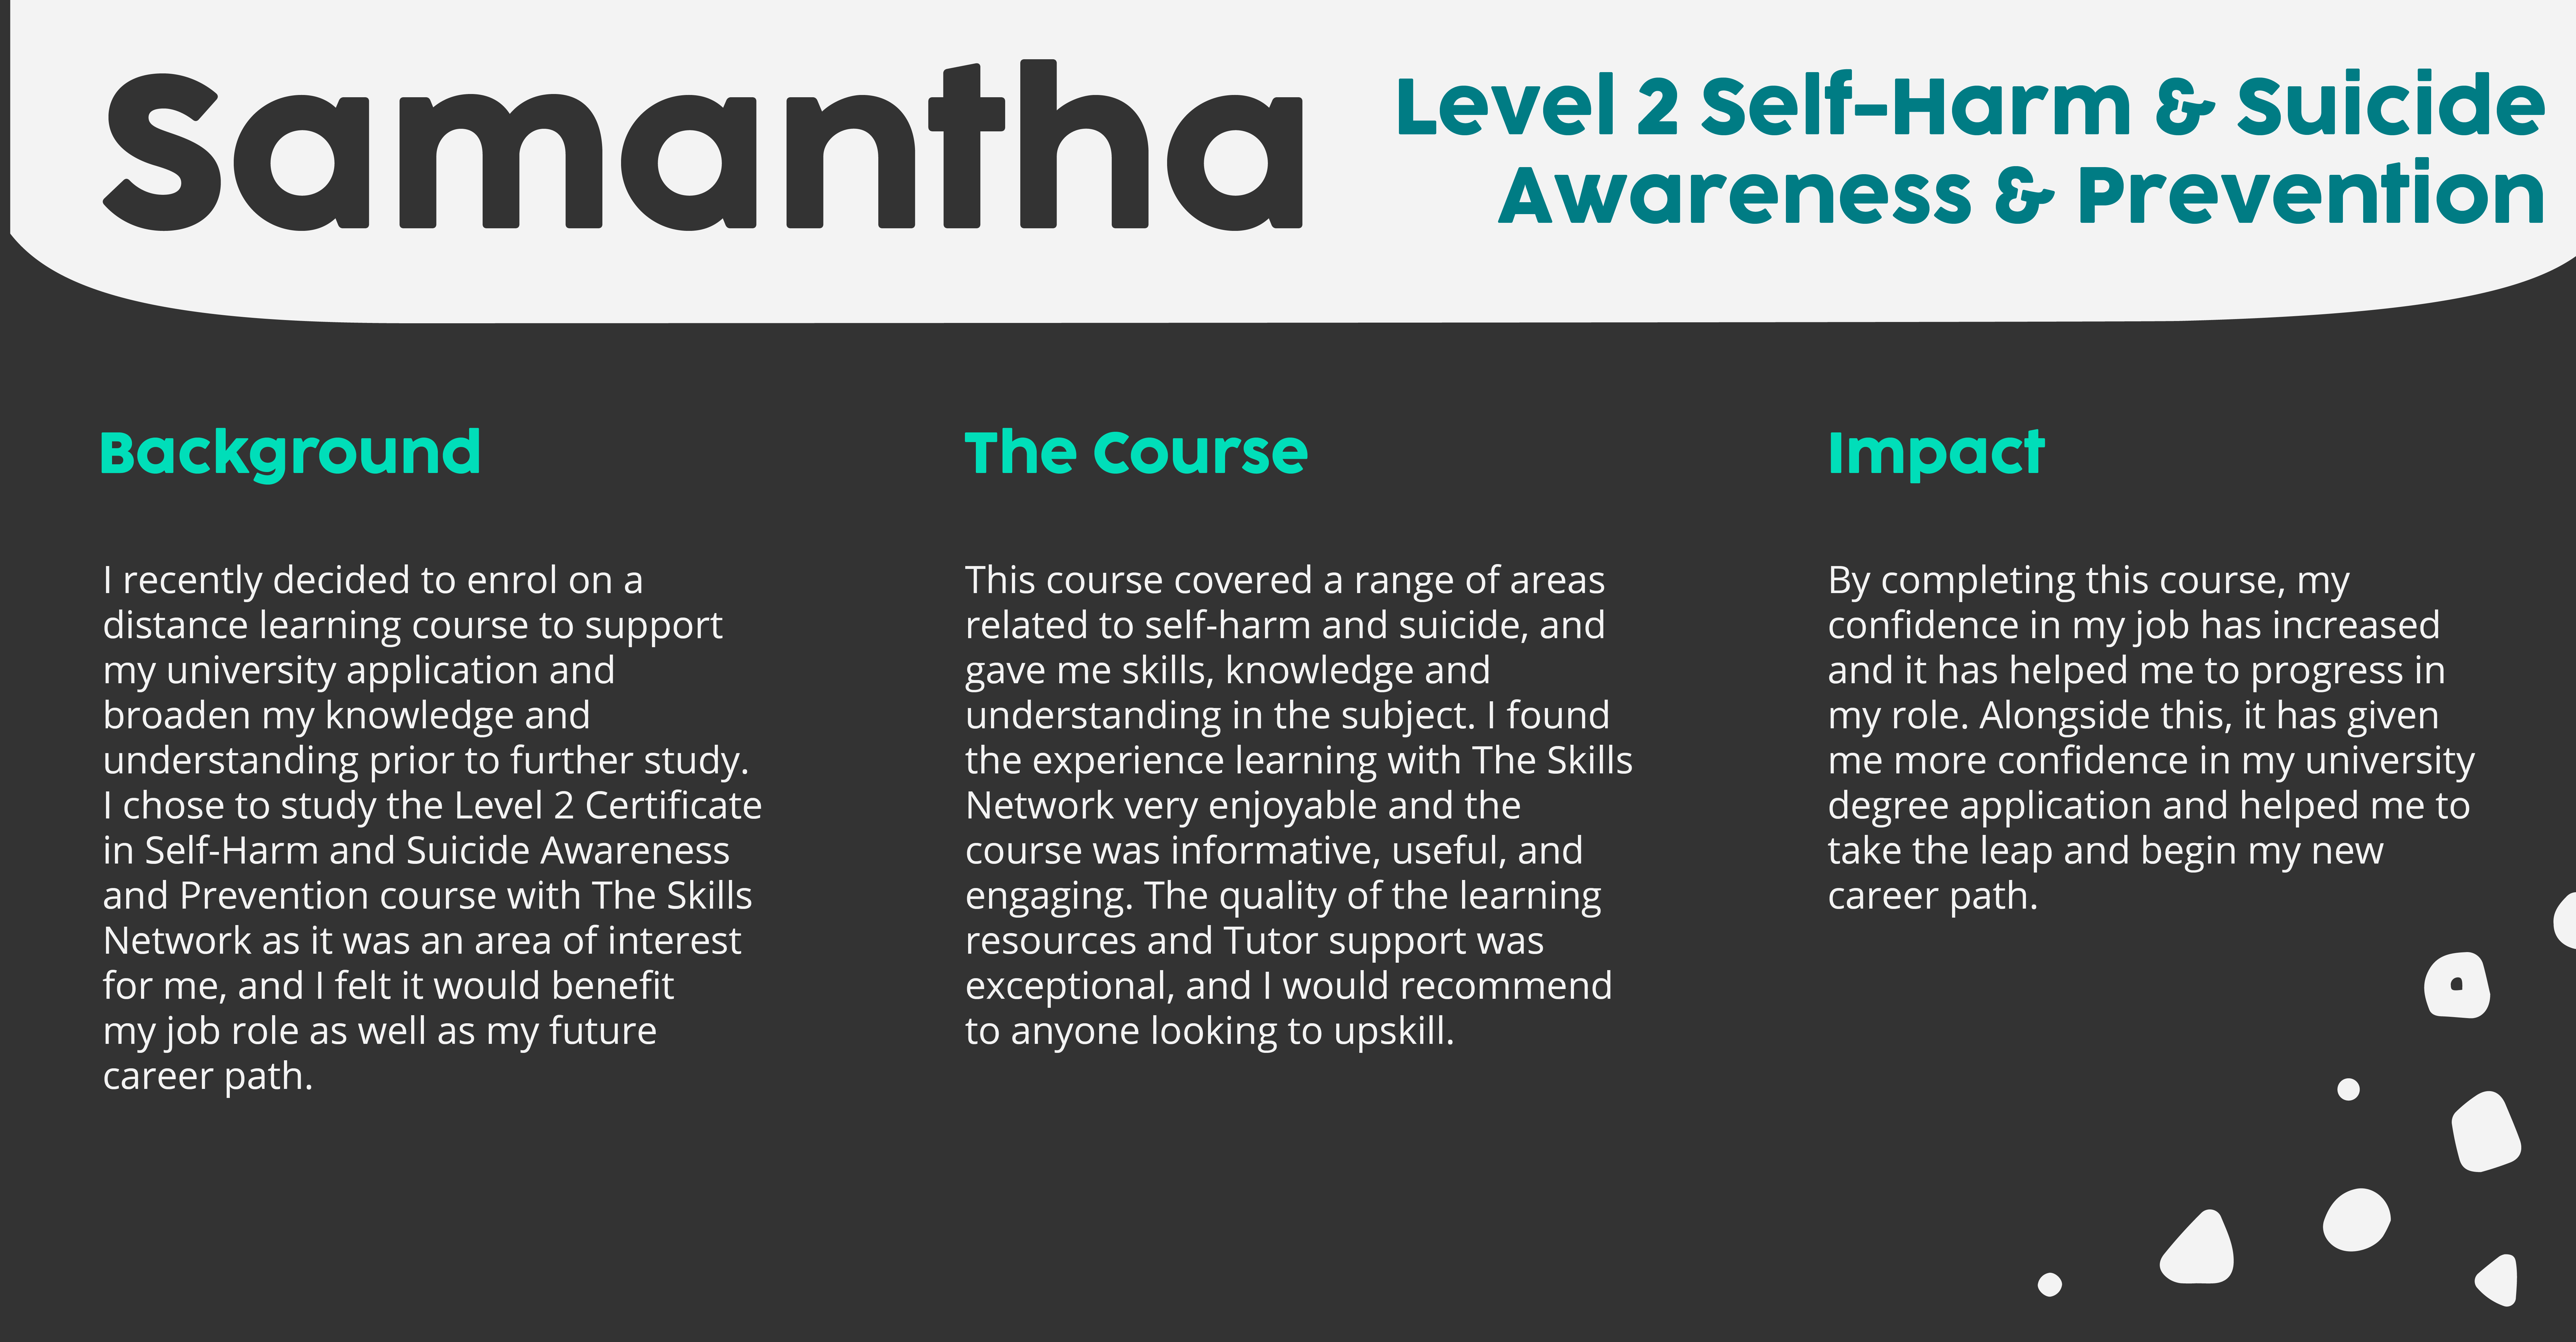 Samantha's experience of the free online suicide awareness training course